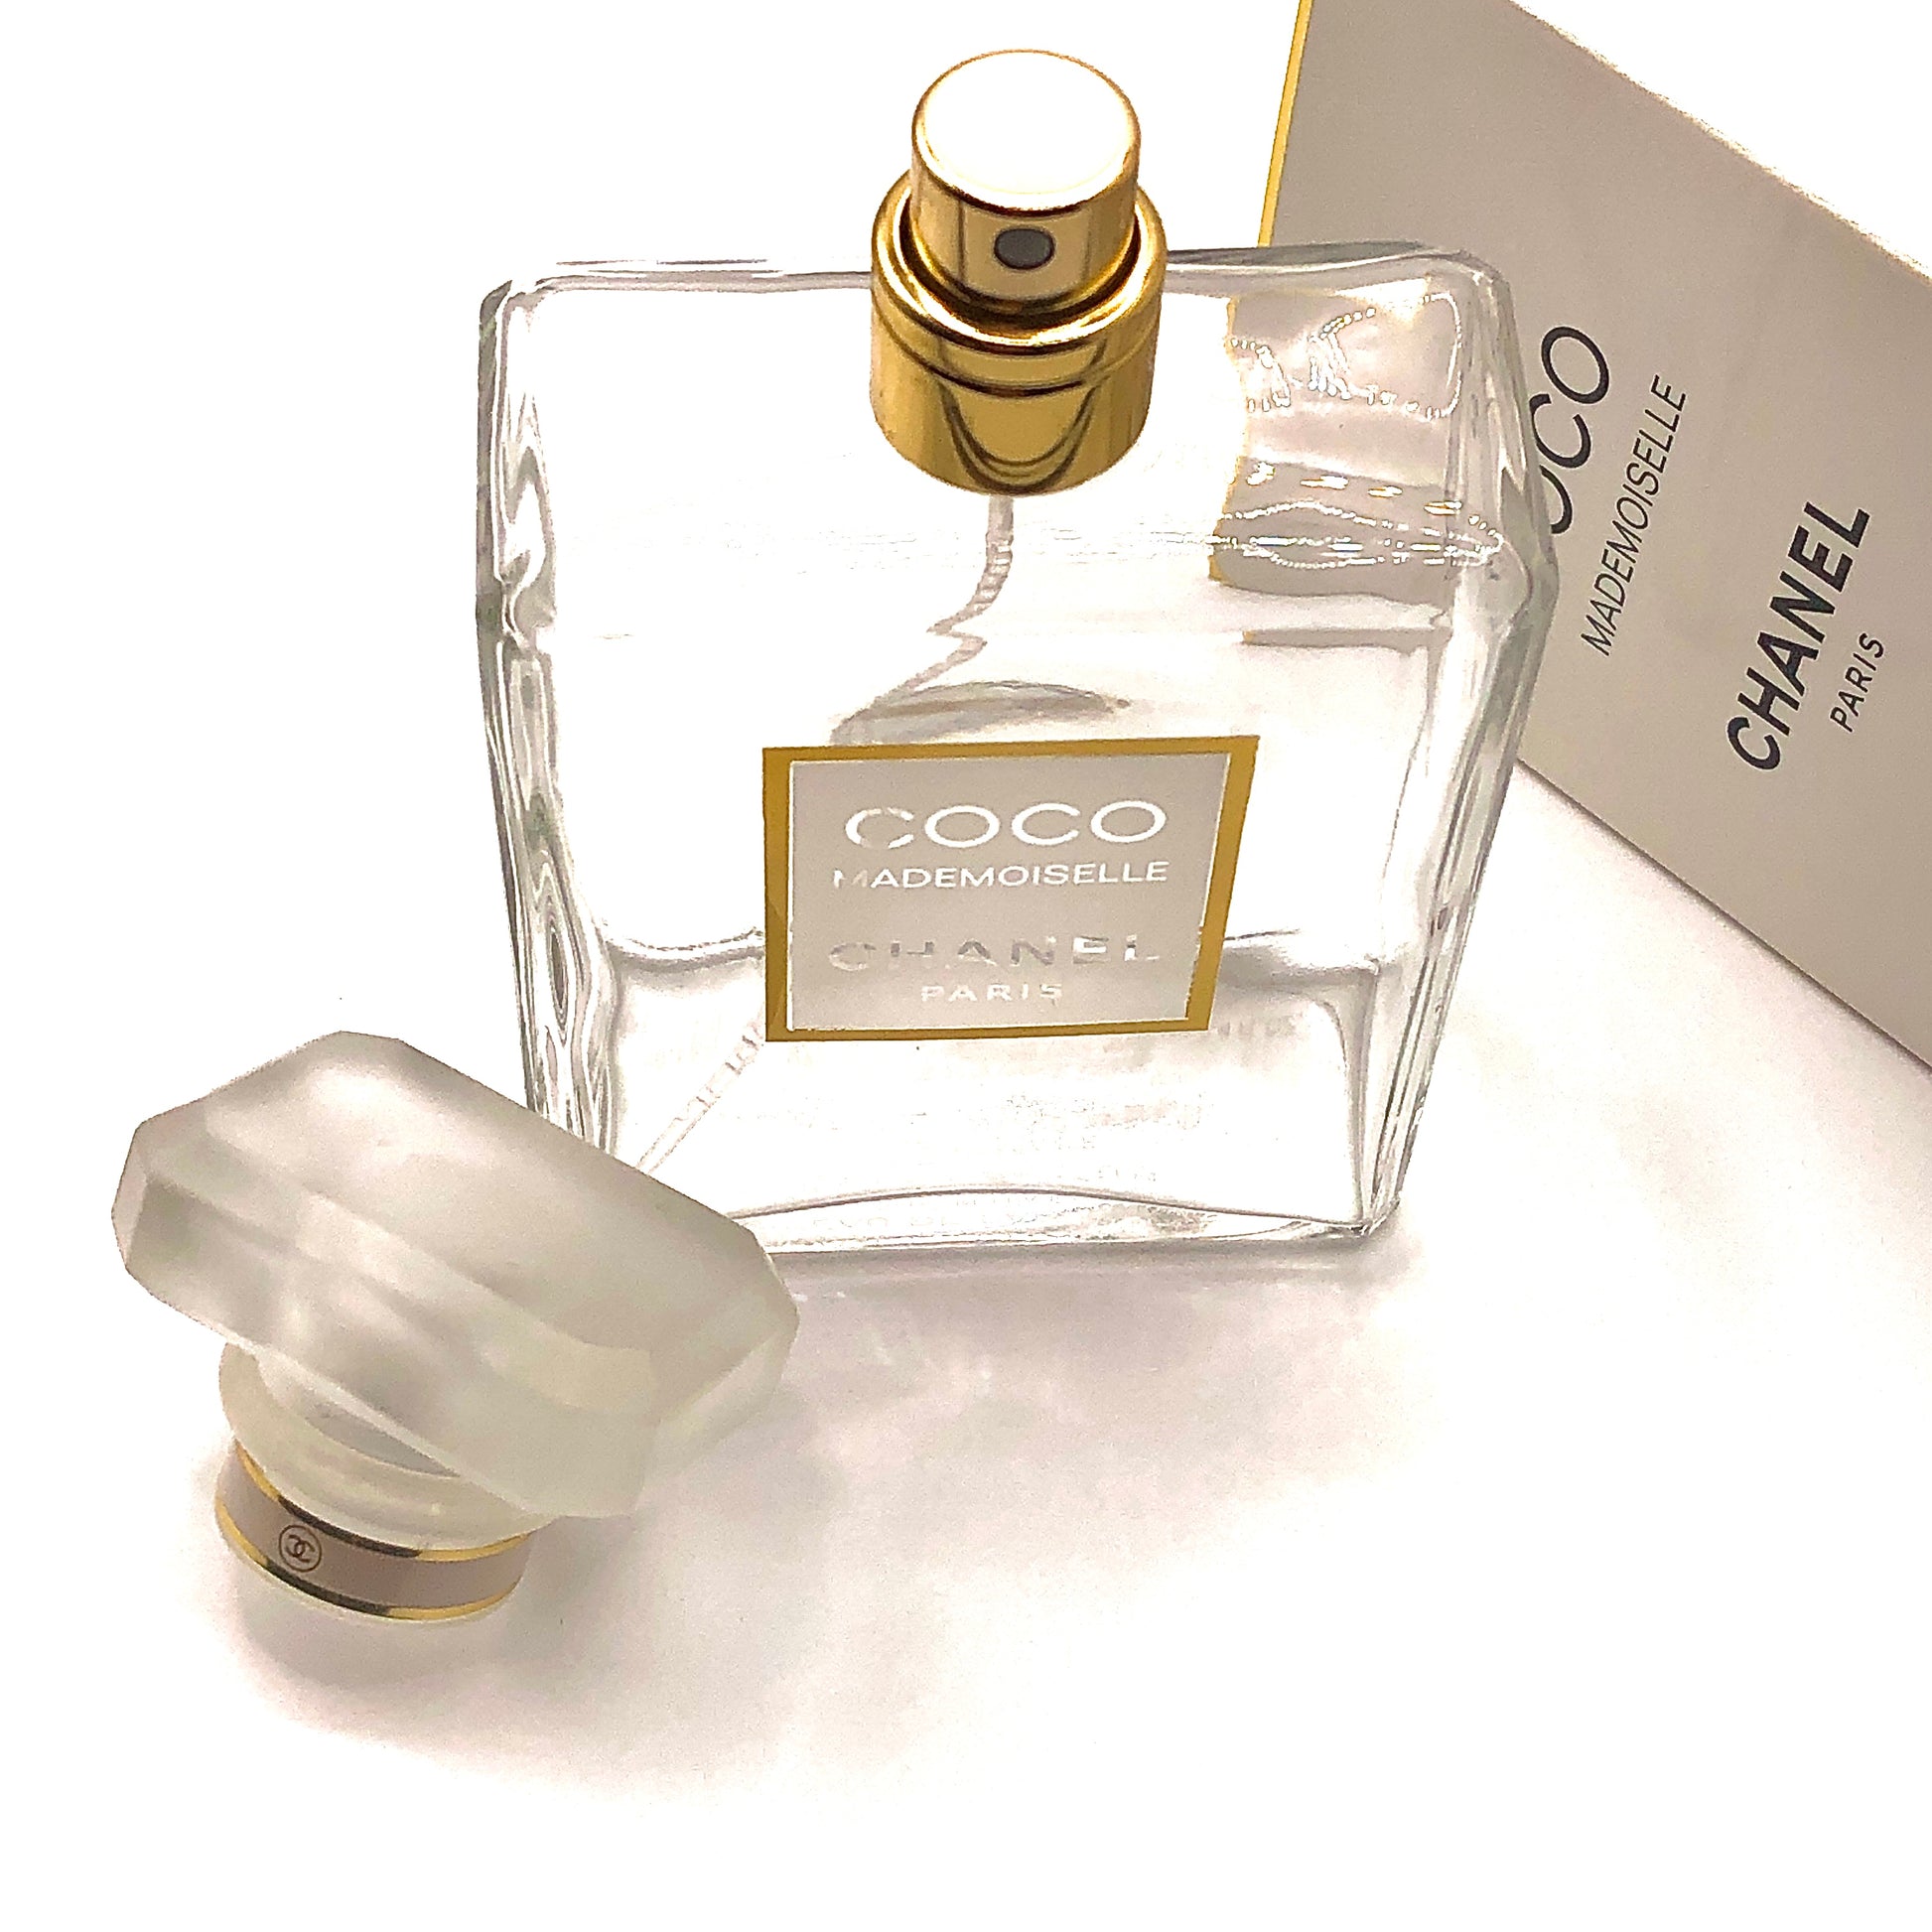 4 Empty Chanel CoCo Mademoiselle Perfume Bottles 3.4oz Movie Props - Fragrance Store Display Decor